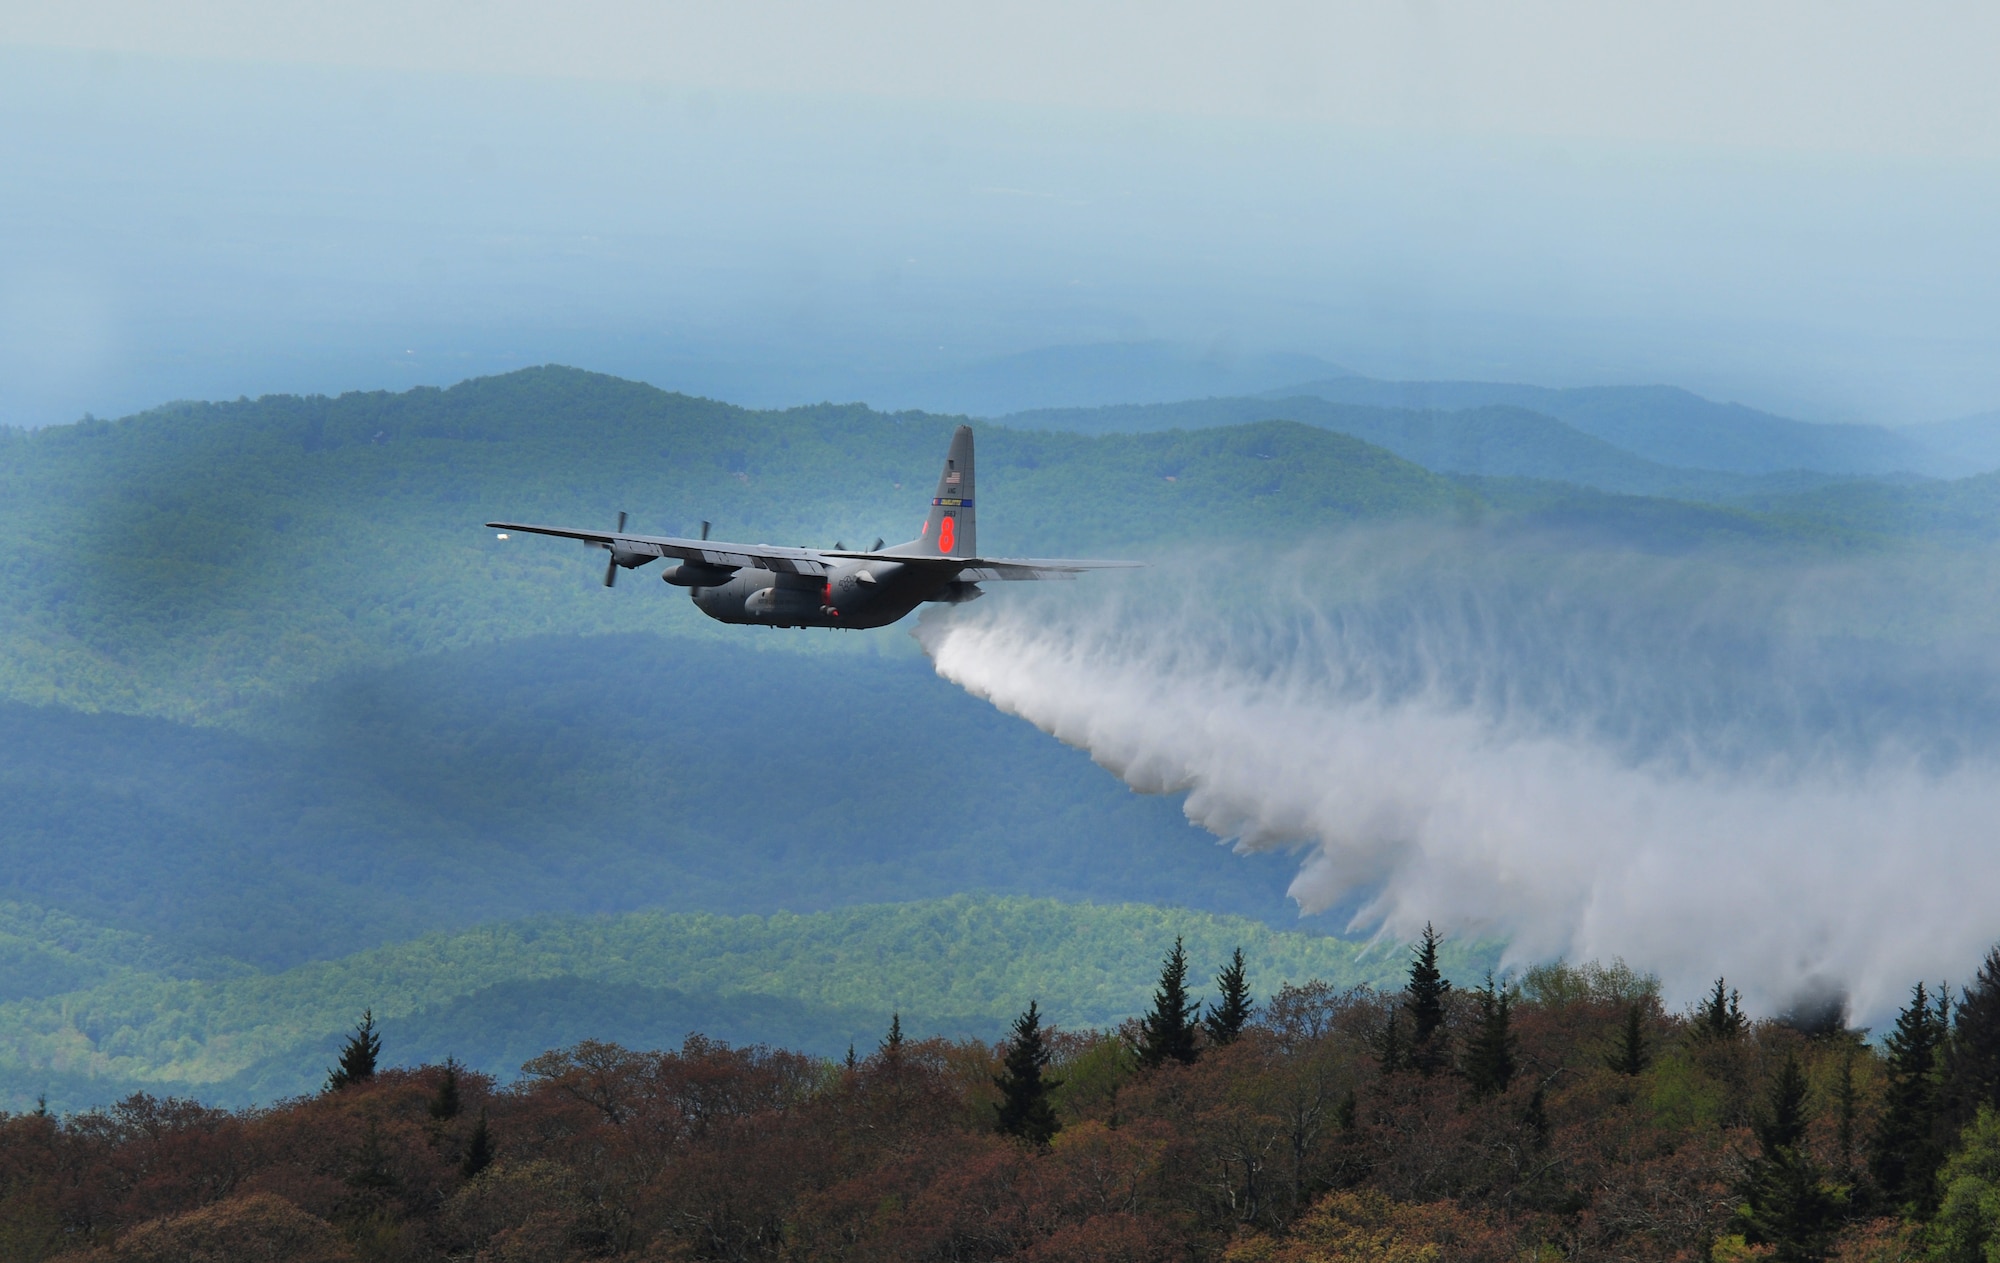 A C-130 Hercules aircraft (MAFFS 8) assigned to the 145th Airlift Wing, North Carolina Air National Guard, drops water in the Pisgah National Forest during Modular Airborne Firefighting System (MAFFS) training May 5, 2012. Annual training is conducted to maintain currency and upgrade qualifications for pilots, aircrew and ground crews in preparation for the fire season. Military C-130s equipped with MAFFS systems can drop up to 3,000 gallons of water on wildfires. ( Air National Guard photo by Master Sgt. Patricia F. Moran/Released)